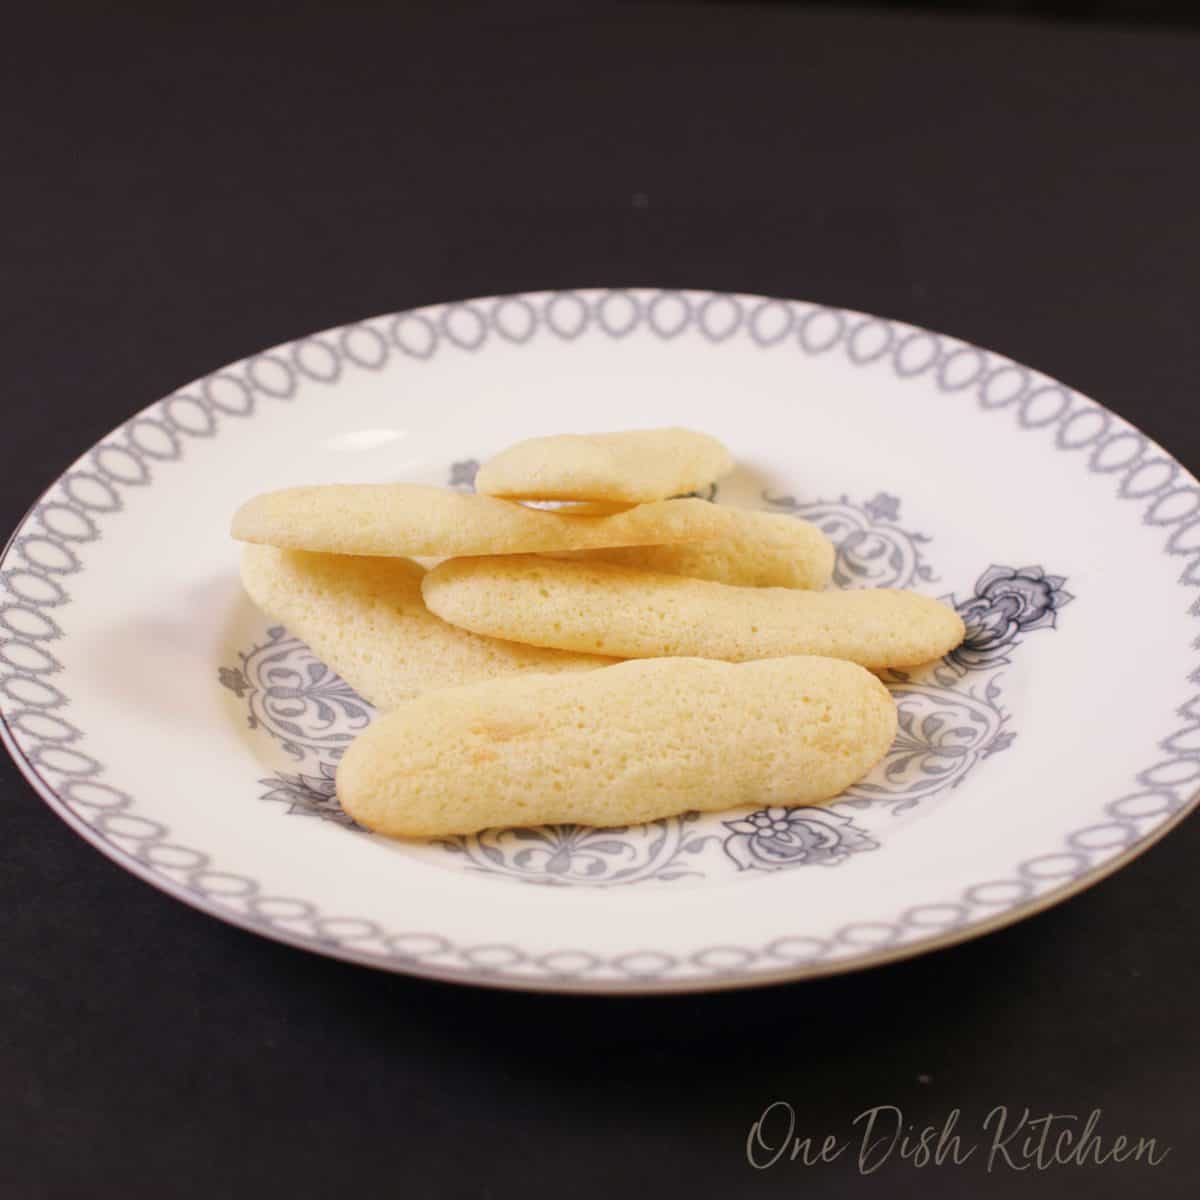 Five ladyfingers on a white plate.